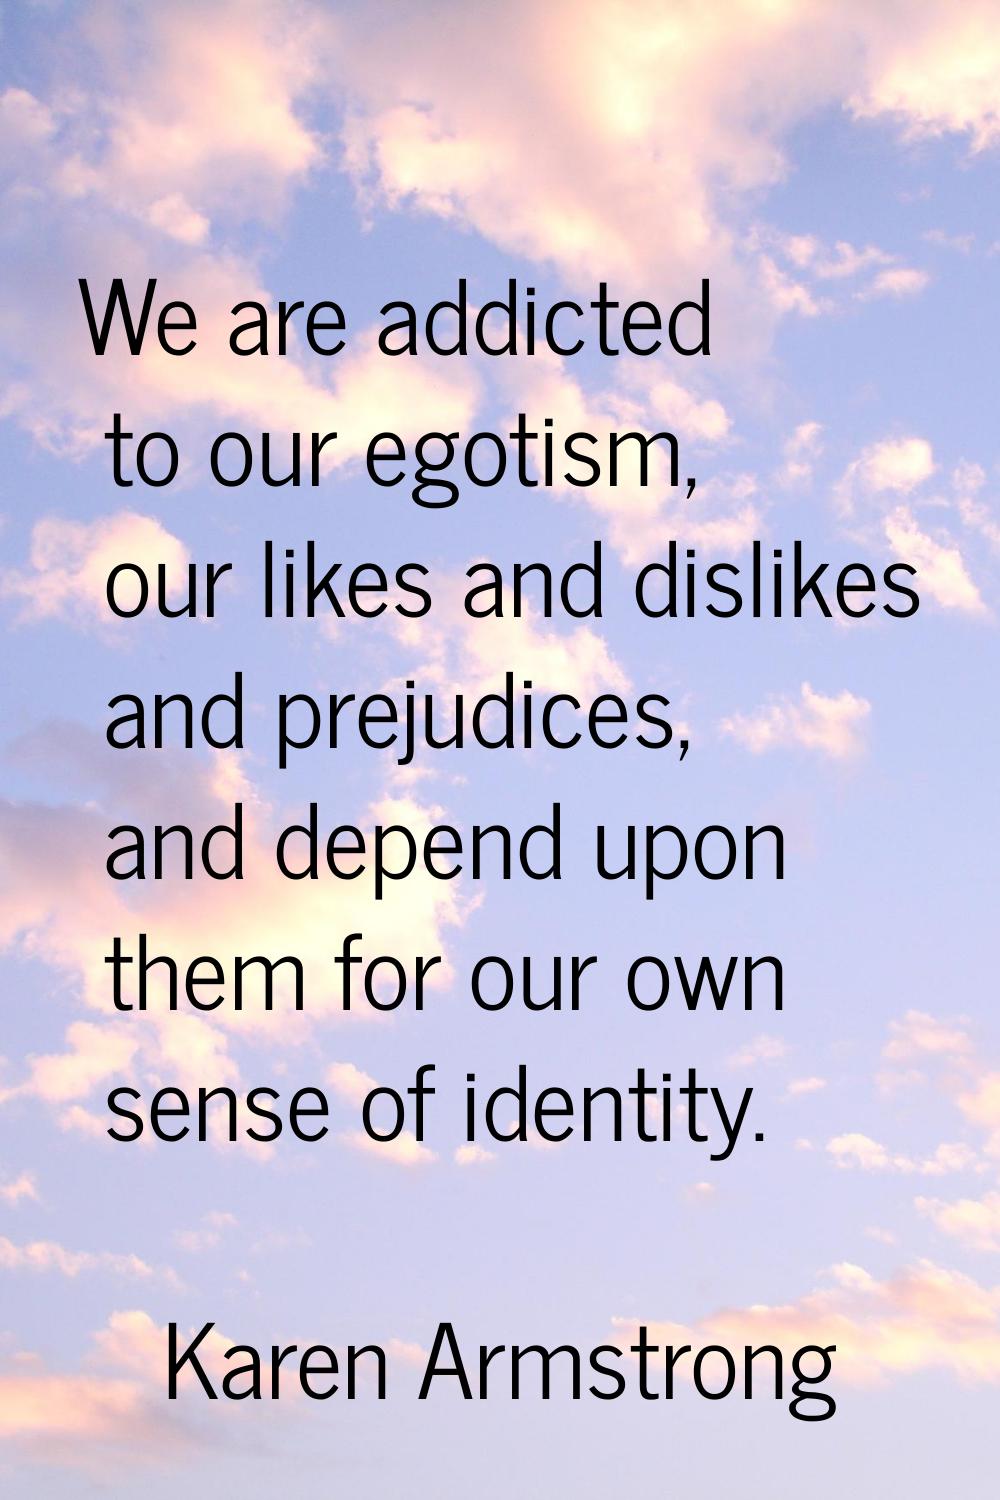 We are addicted to our egotism, our likes and dislikes and prejudices, and depend upon them for our